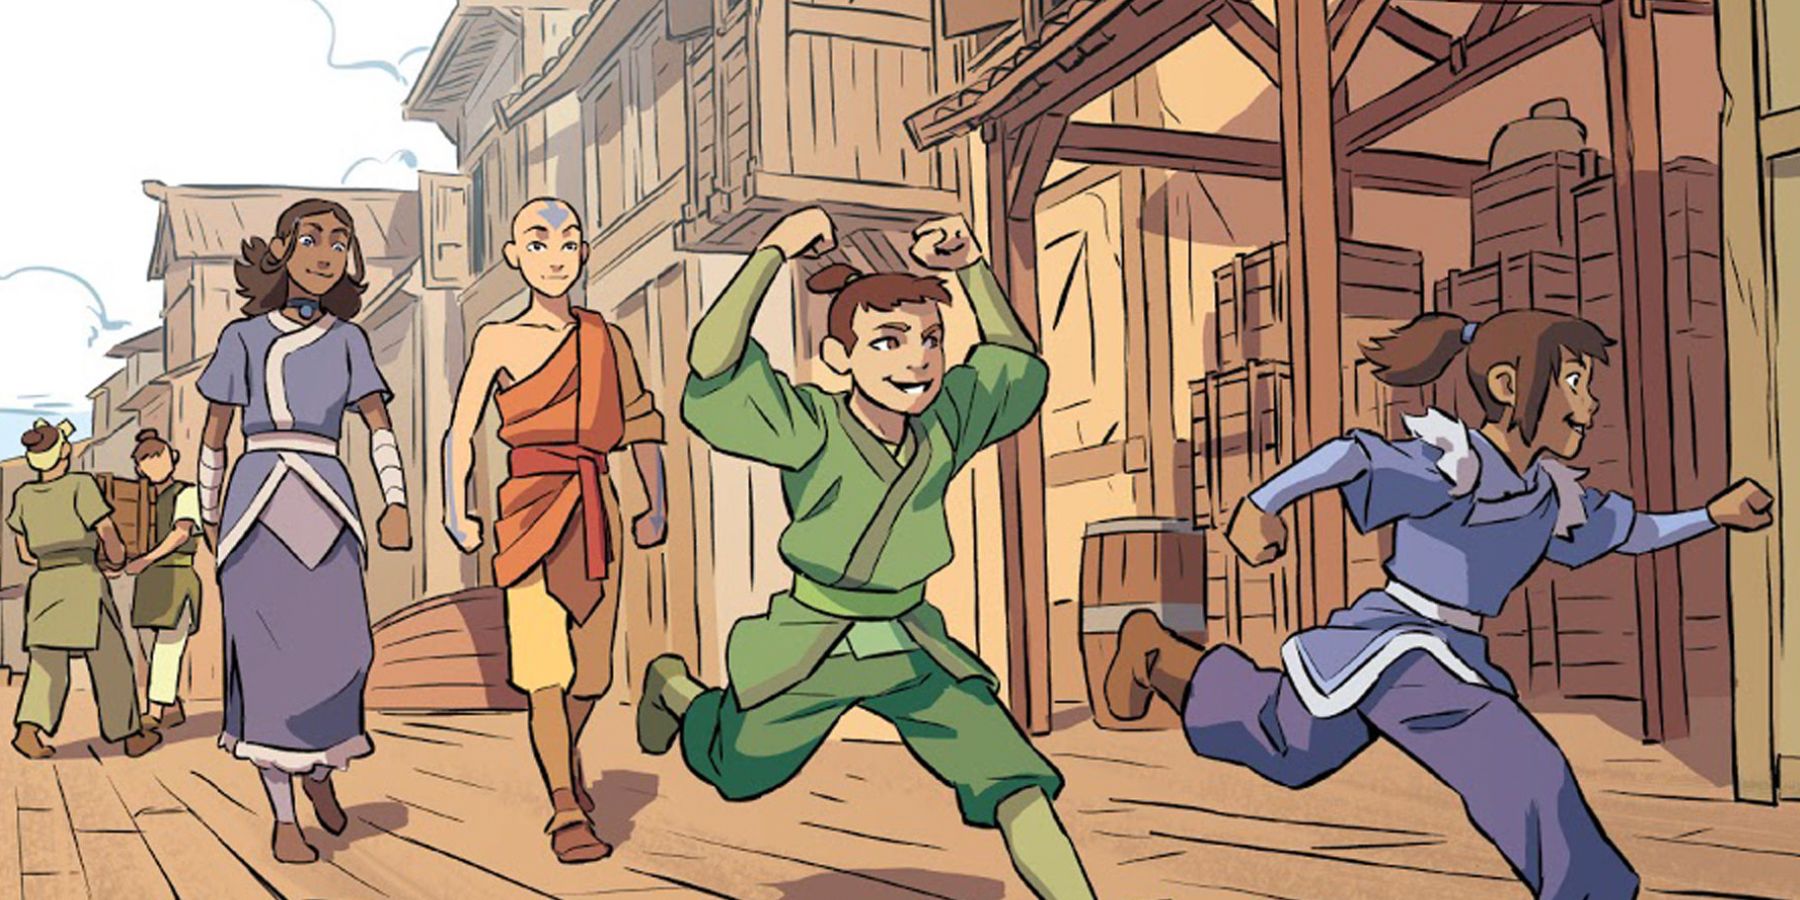 Katara and Aang walking alongside wooden buildings with children running ahead of them in the Avatar comics